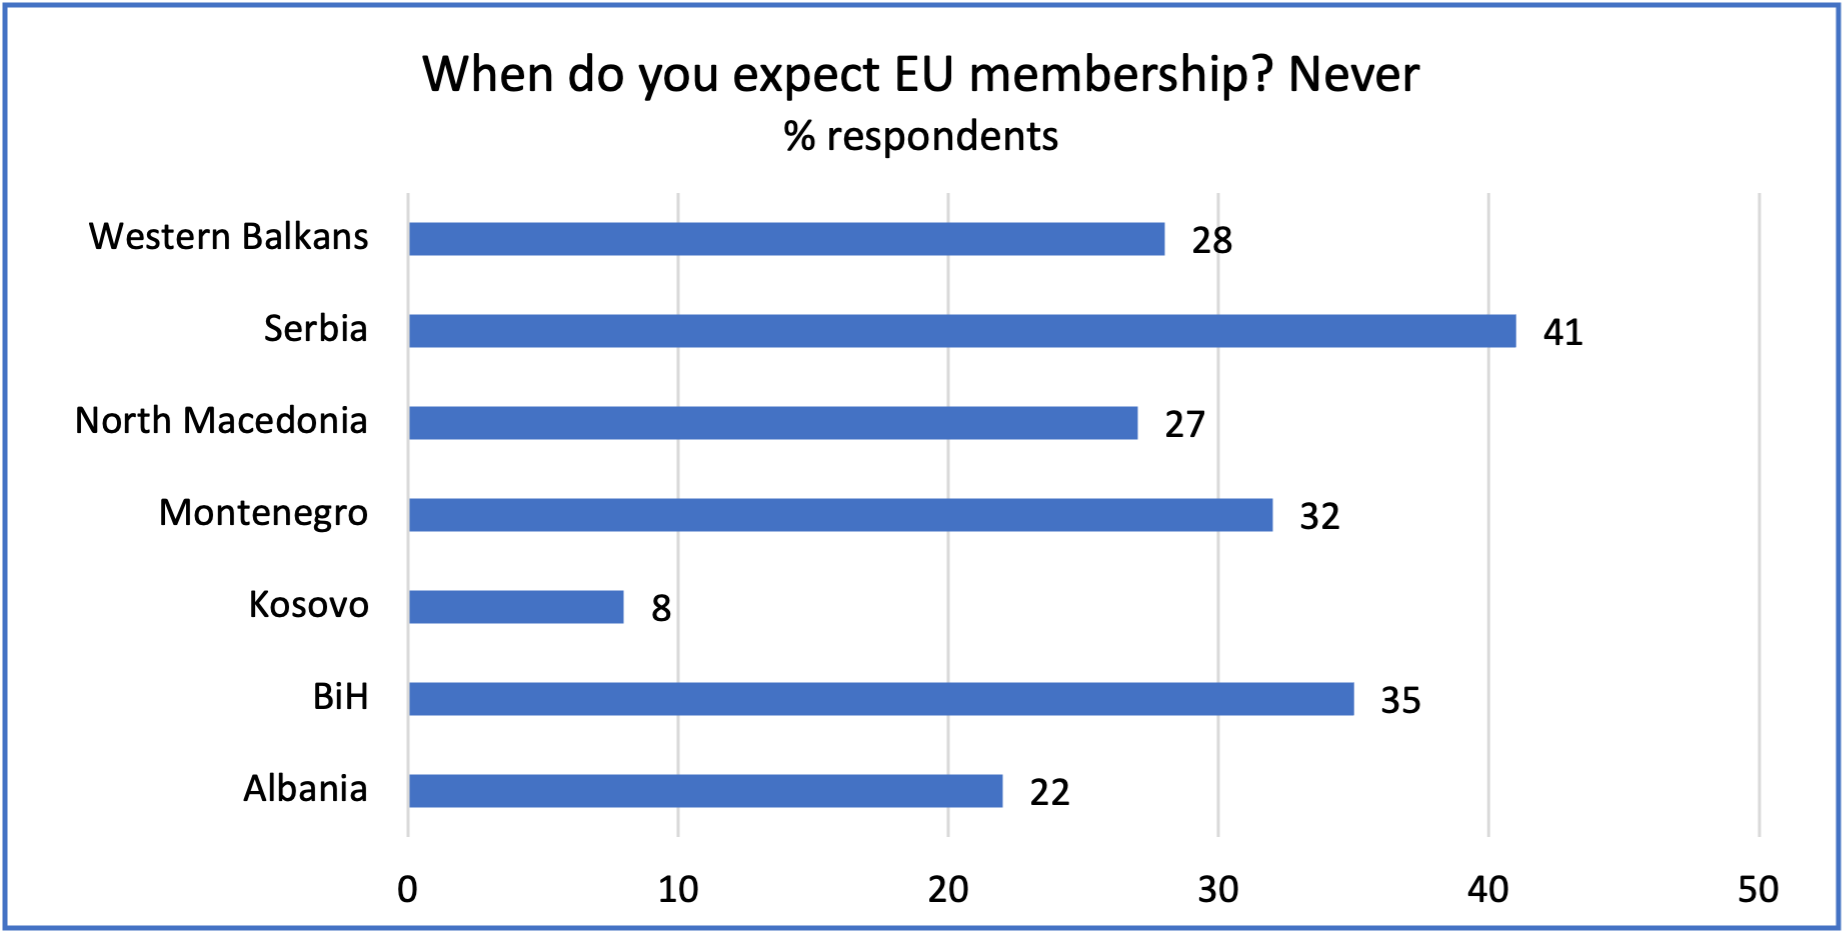 Public Expectations on EU Membership in the Western Balkans in 2022